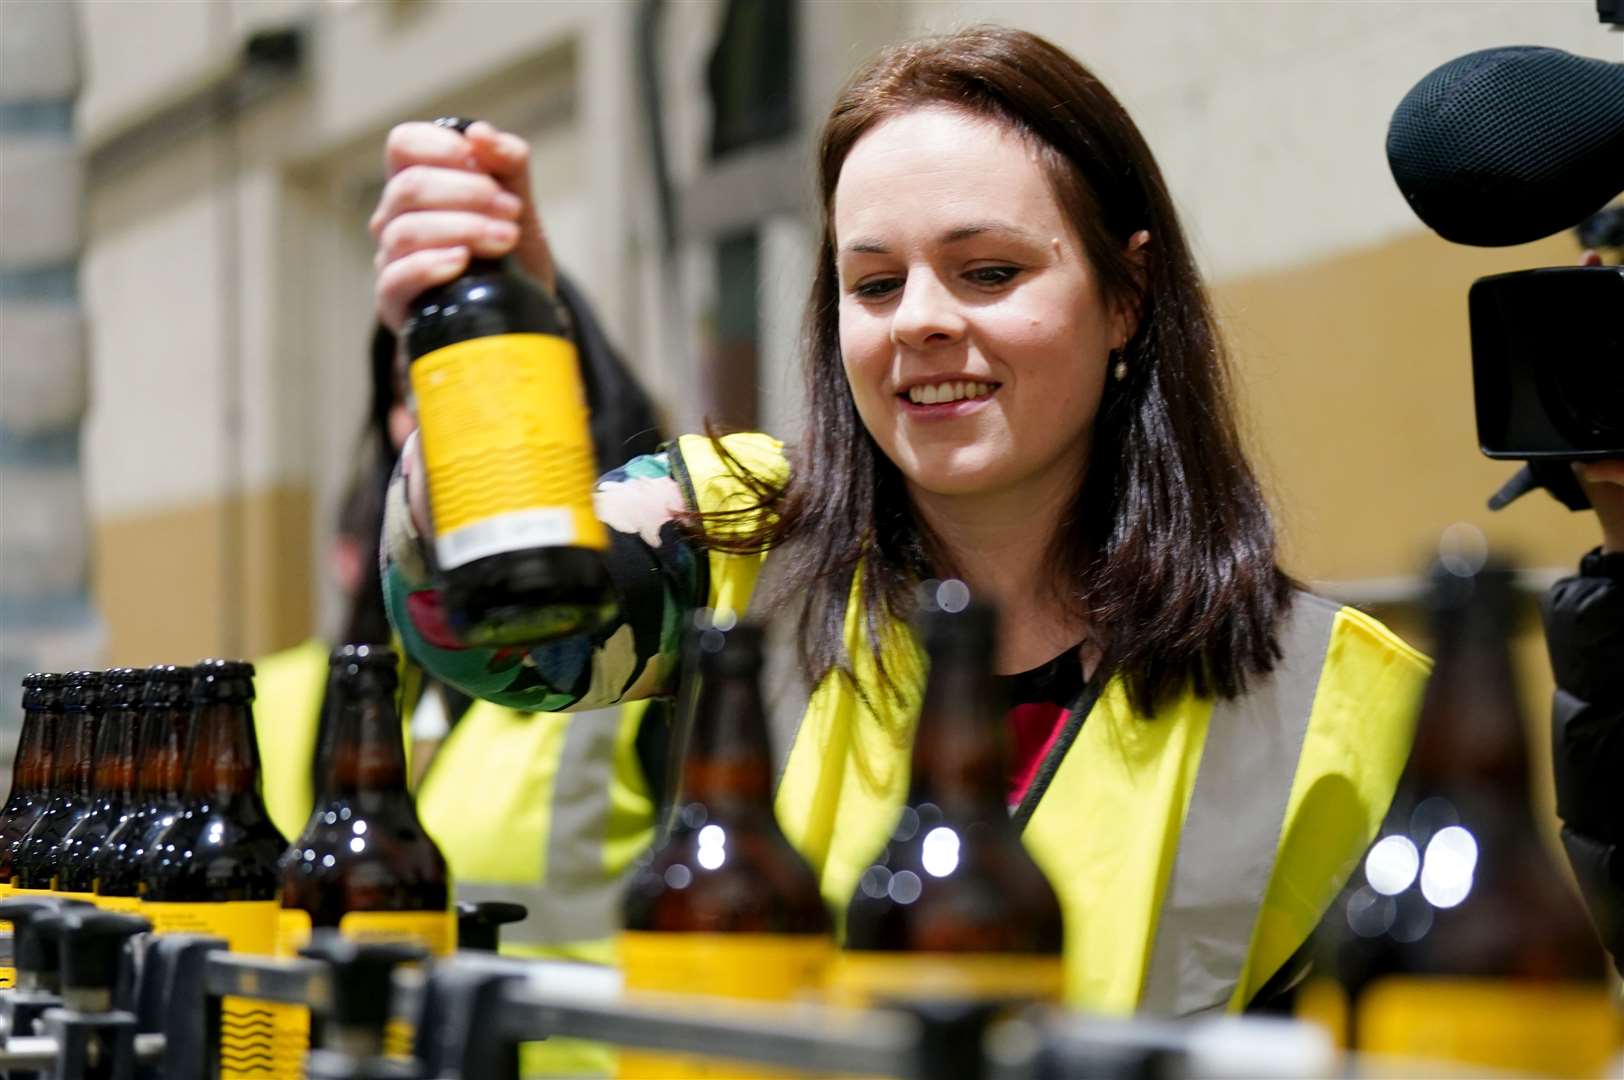 Kate Forbes has a go on the production line at the Cairngorm Brewery in Aviemore (Jane Barlow/PA)